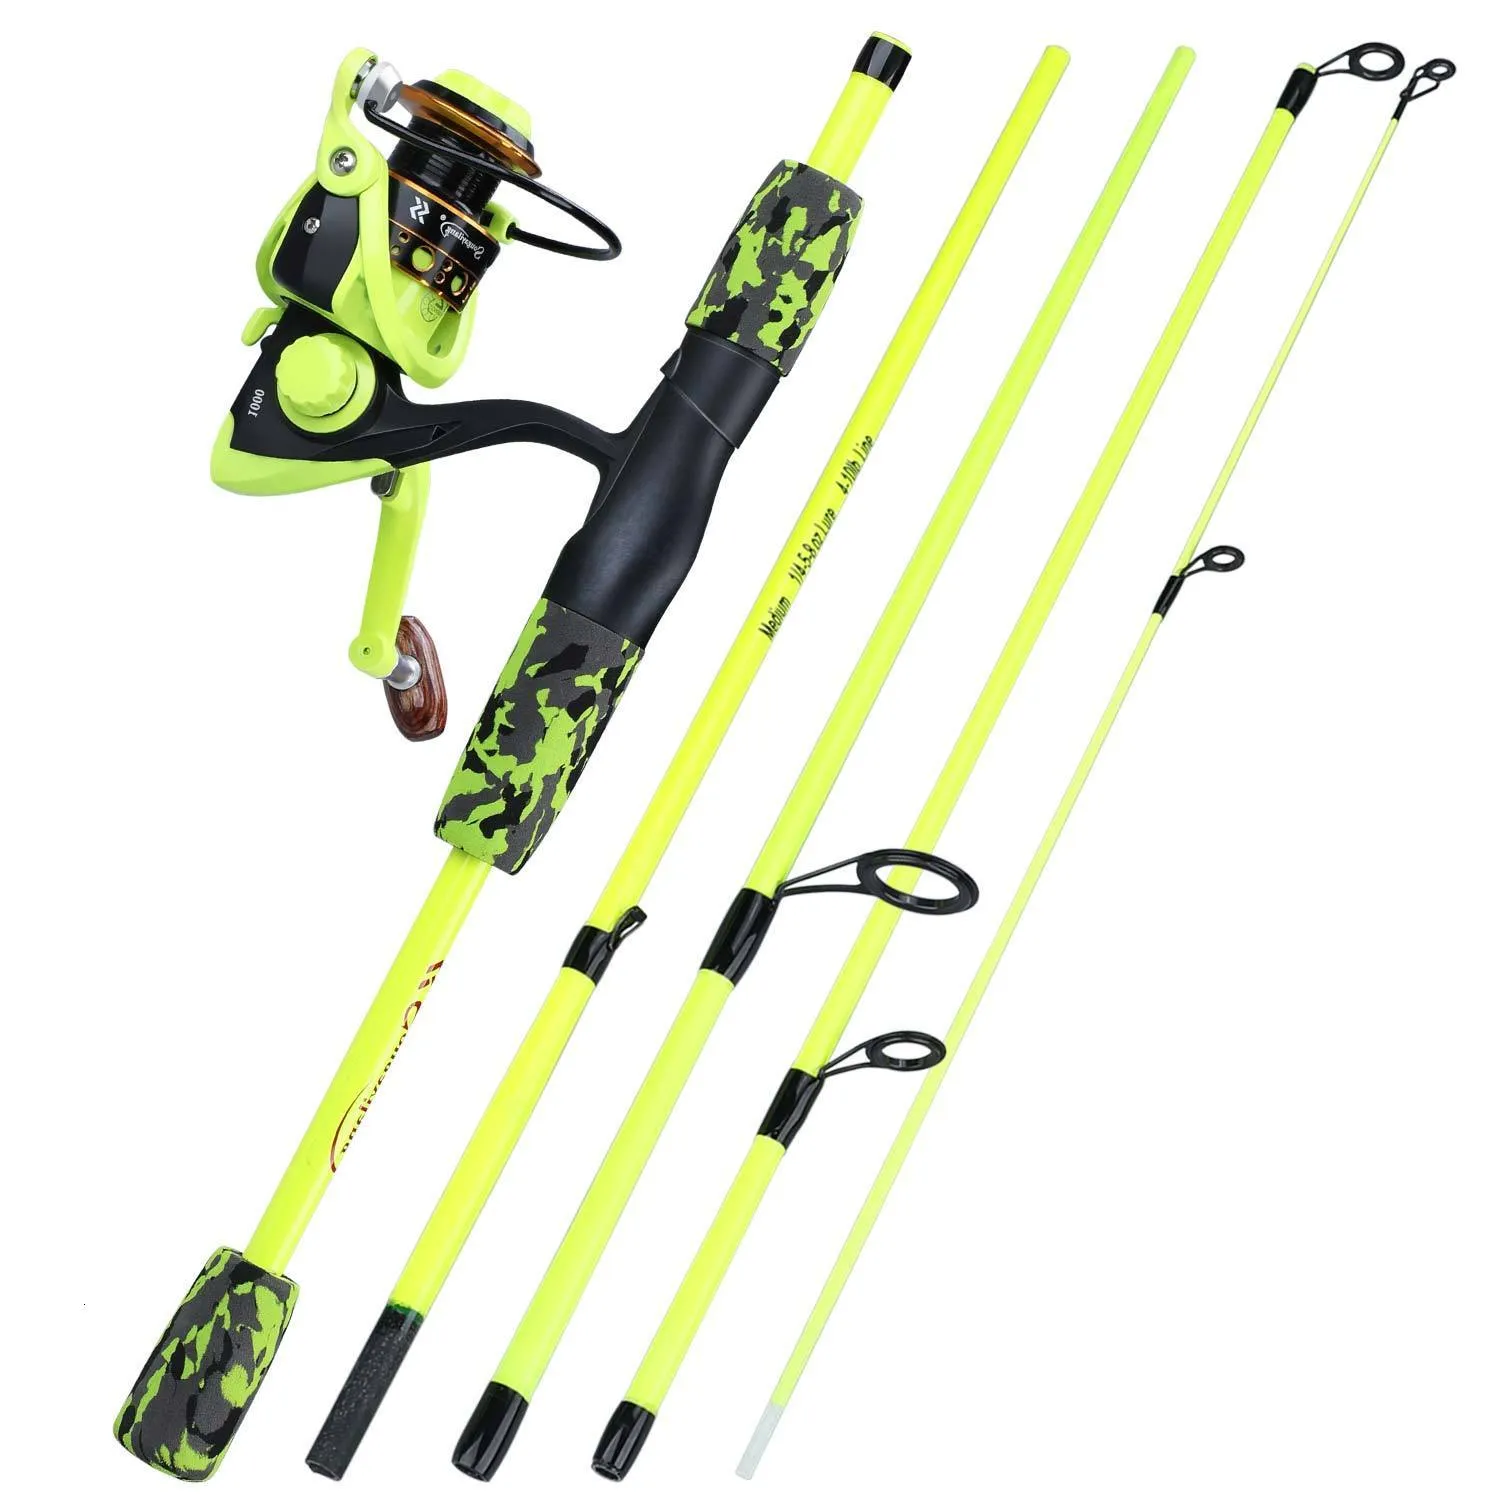 Sougayilang 1.70m Collapsible Fishing Pole Combo Portable 5 Section Carbon  Fiber Fishing Pole And Spinning Reel Set 1000 3000 From Dao05, $24.35